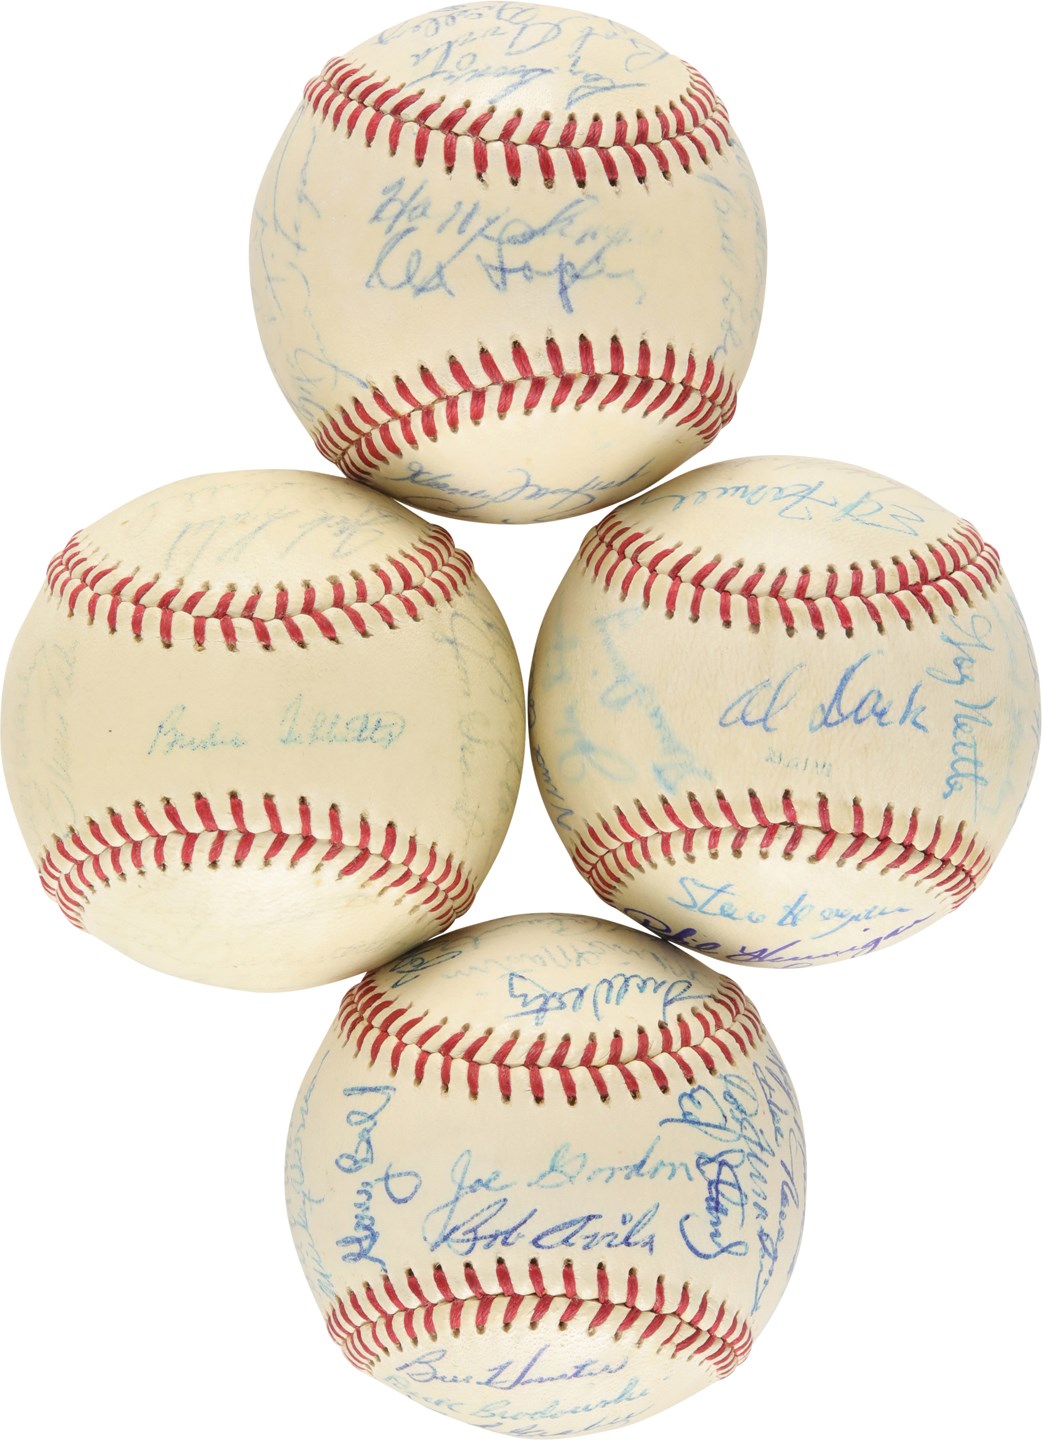 - 1952-1971 Cleveland Indians Team-Signed Ball Collection (4)